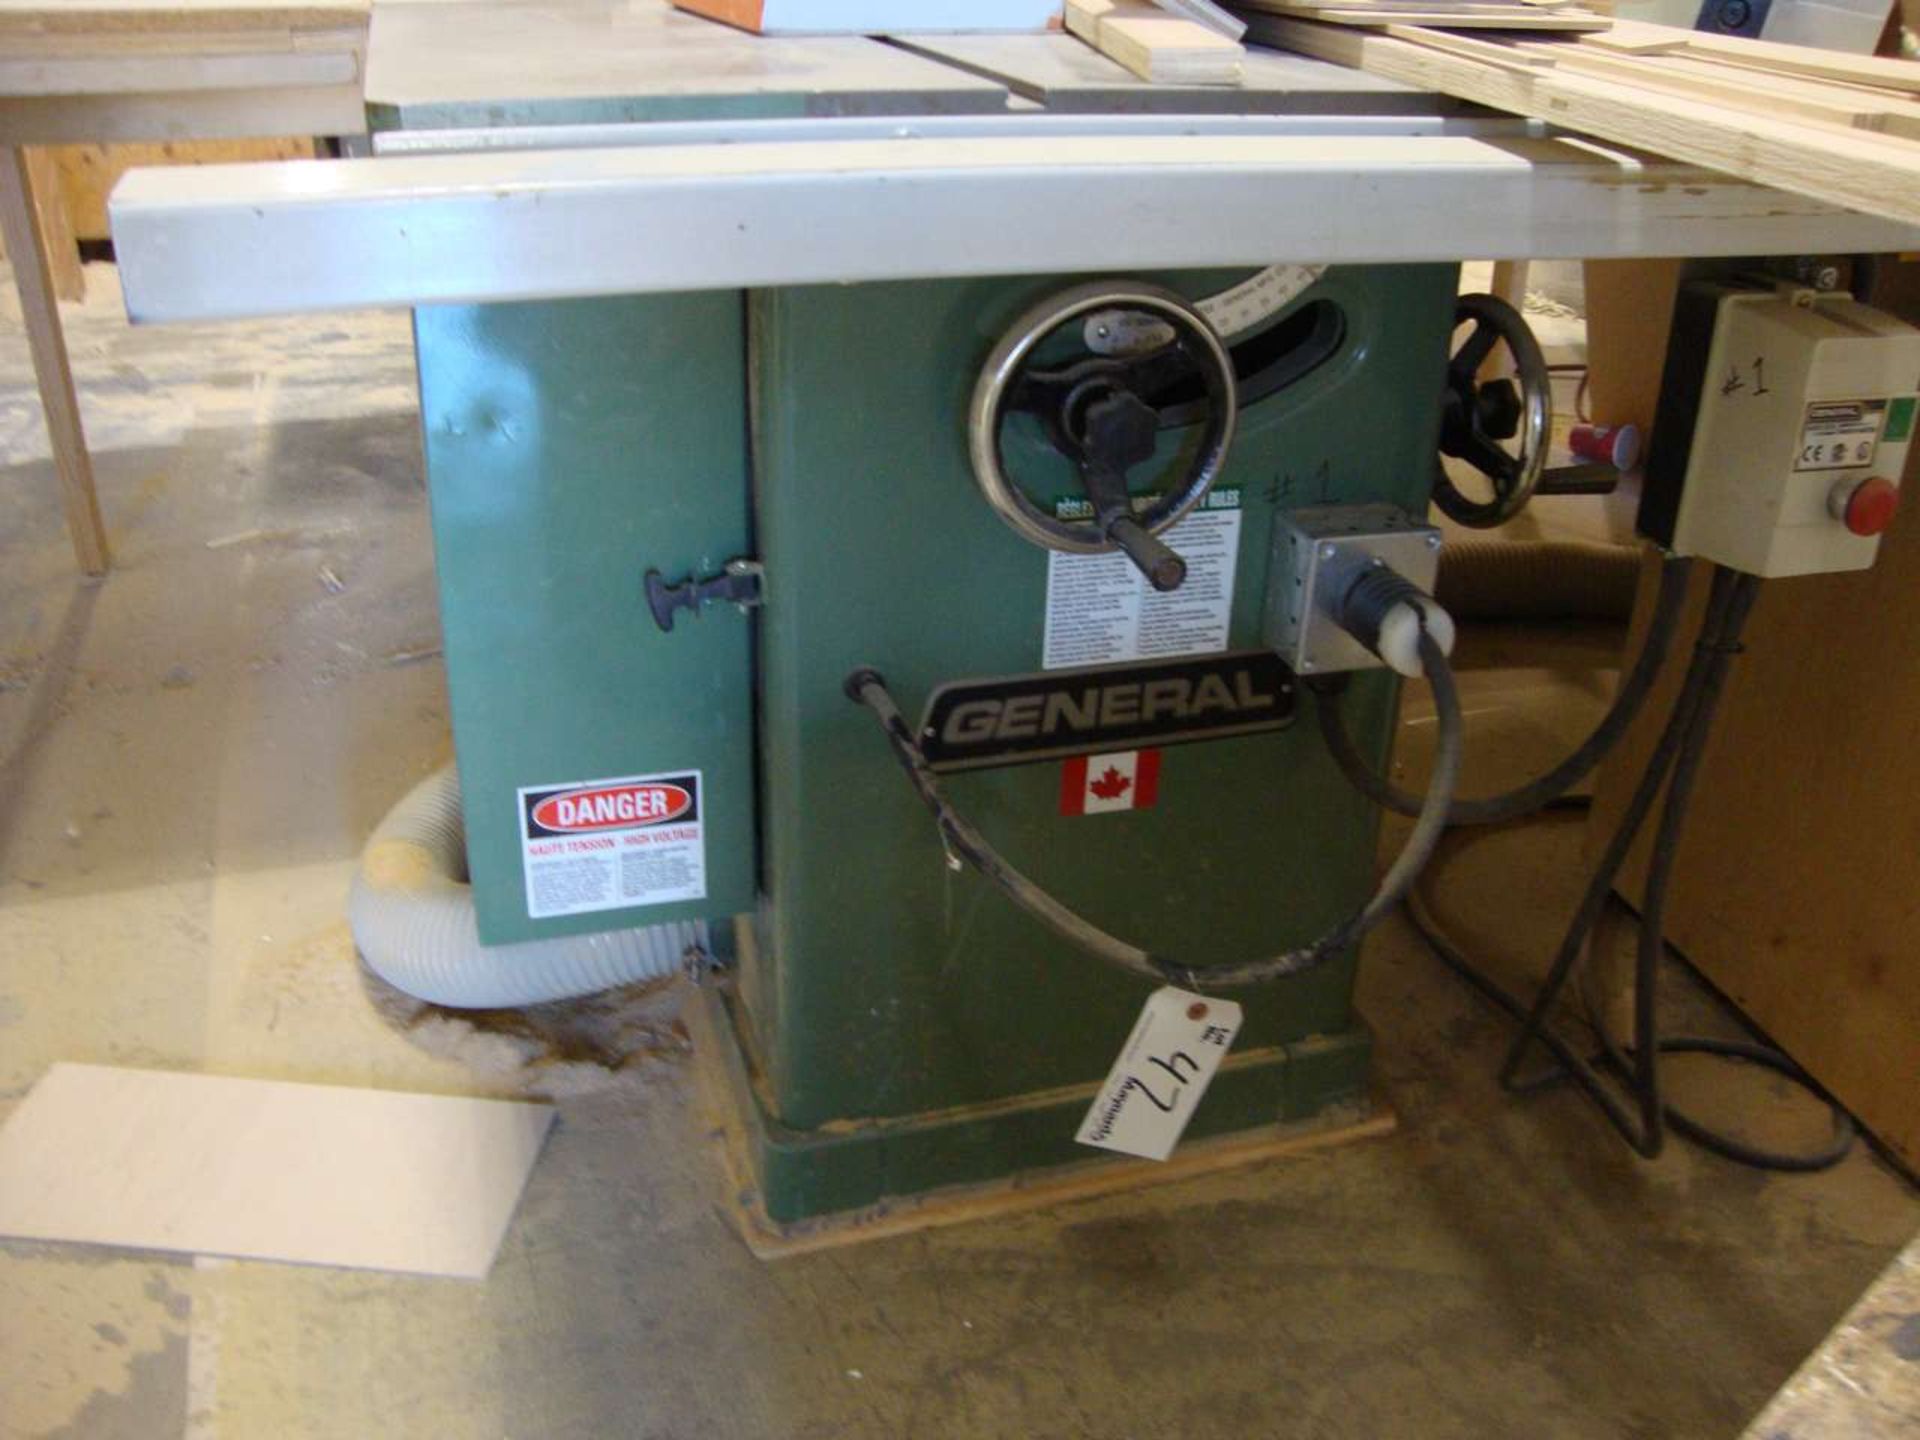 General 300 10" tilting arbor table saw